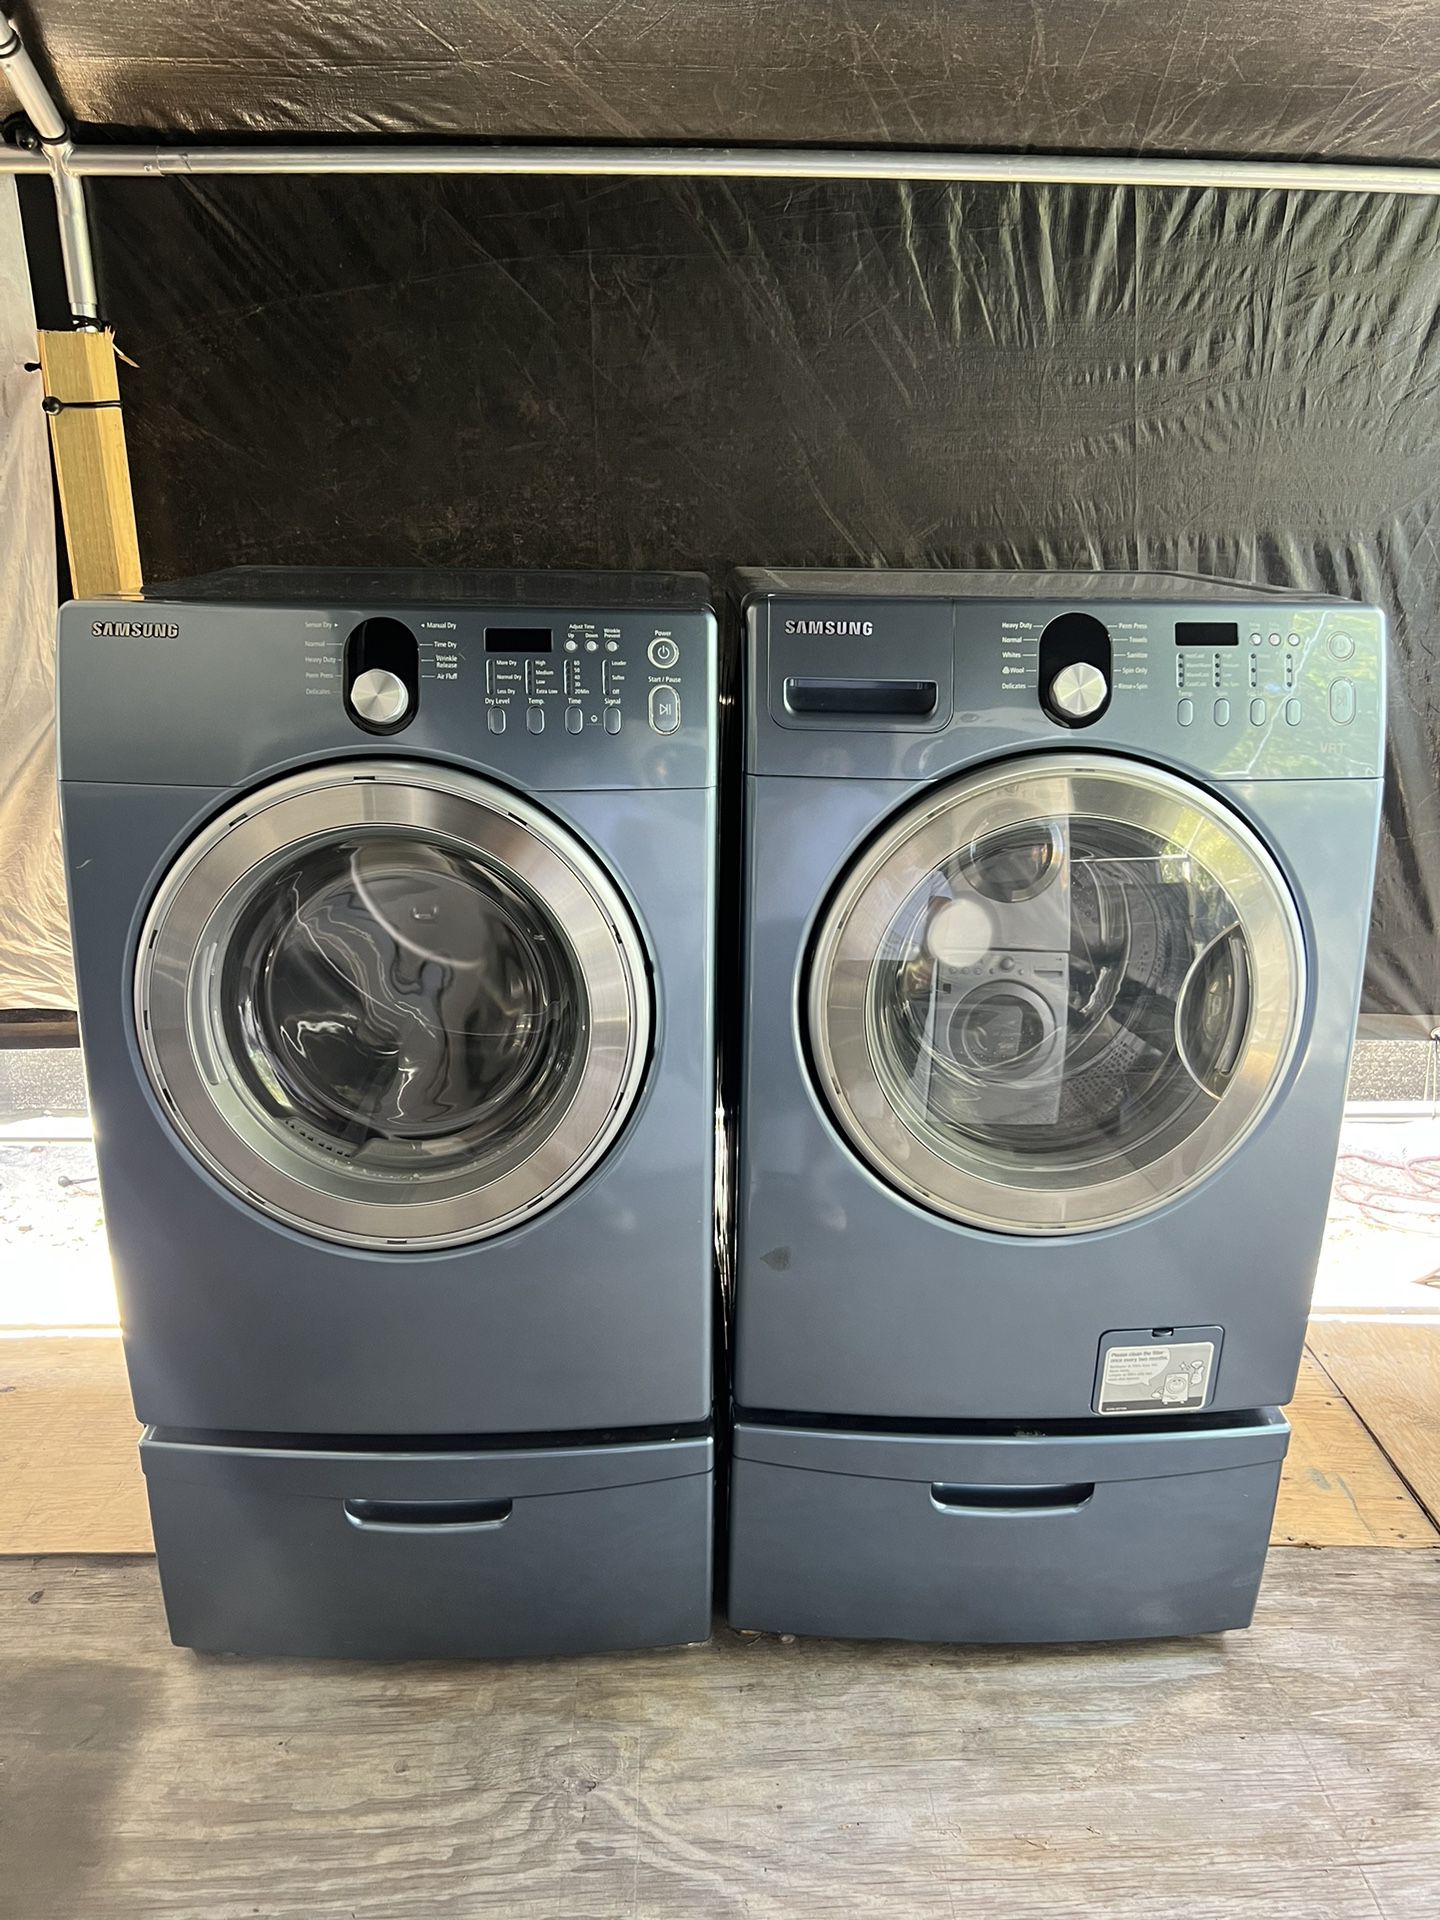 Samsung Washer&dryer Frontload Set   60 day warranty/ Located at:📍5415 Carmack Rd Tampa Fl 33610📍 